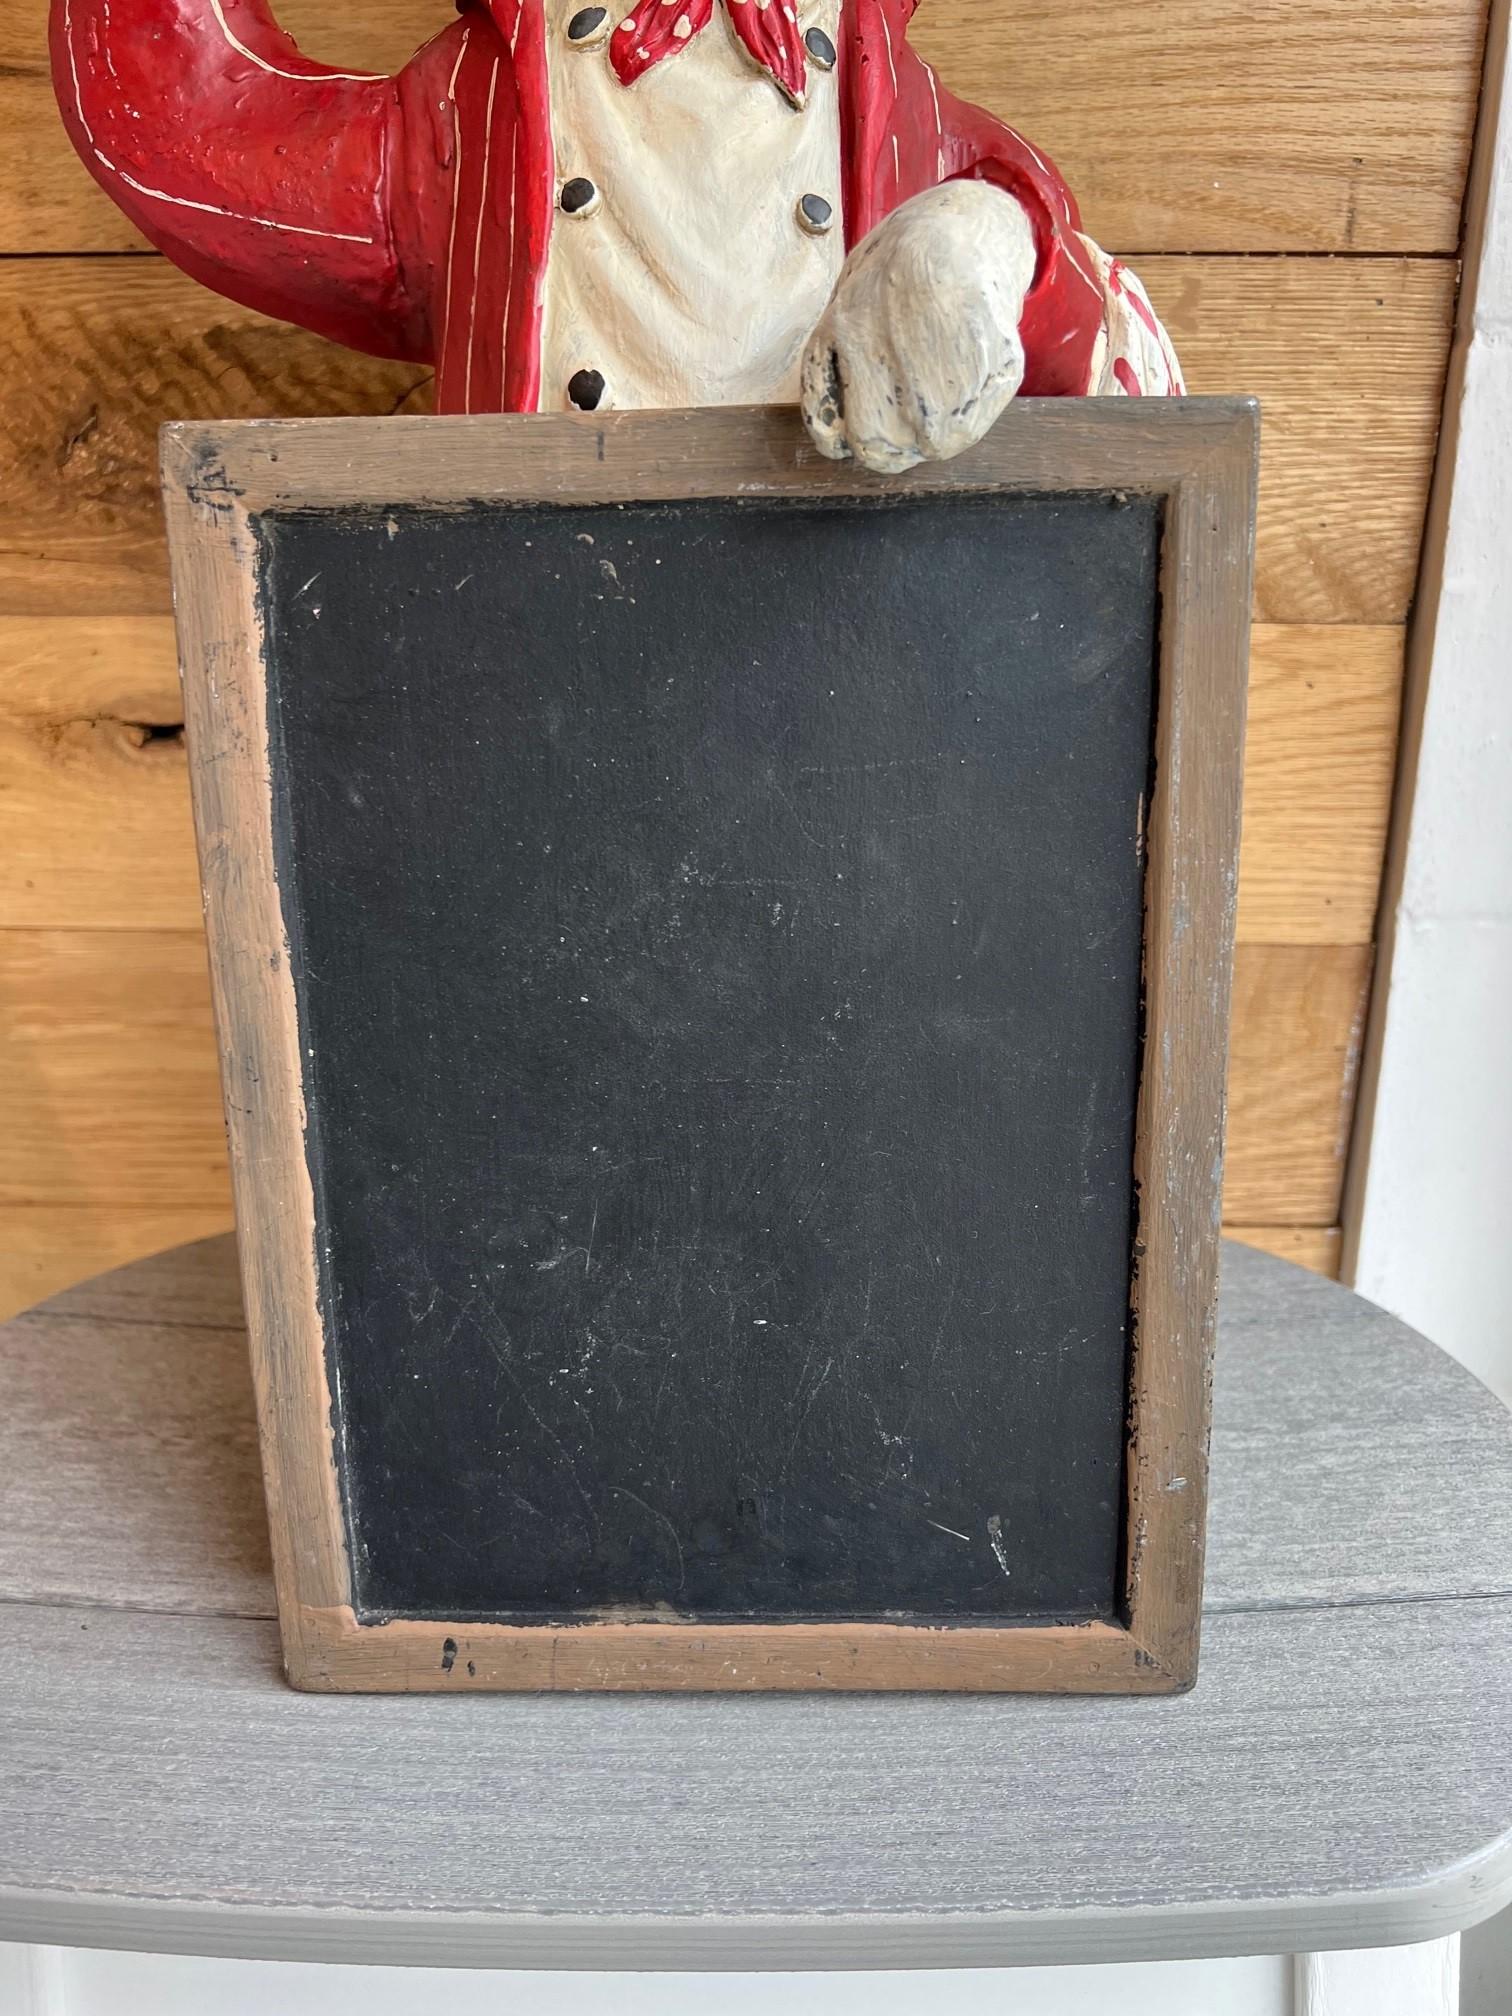 chef statue with chalkboard